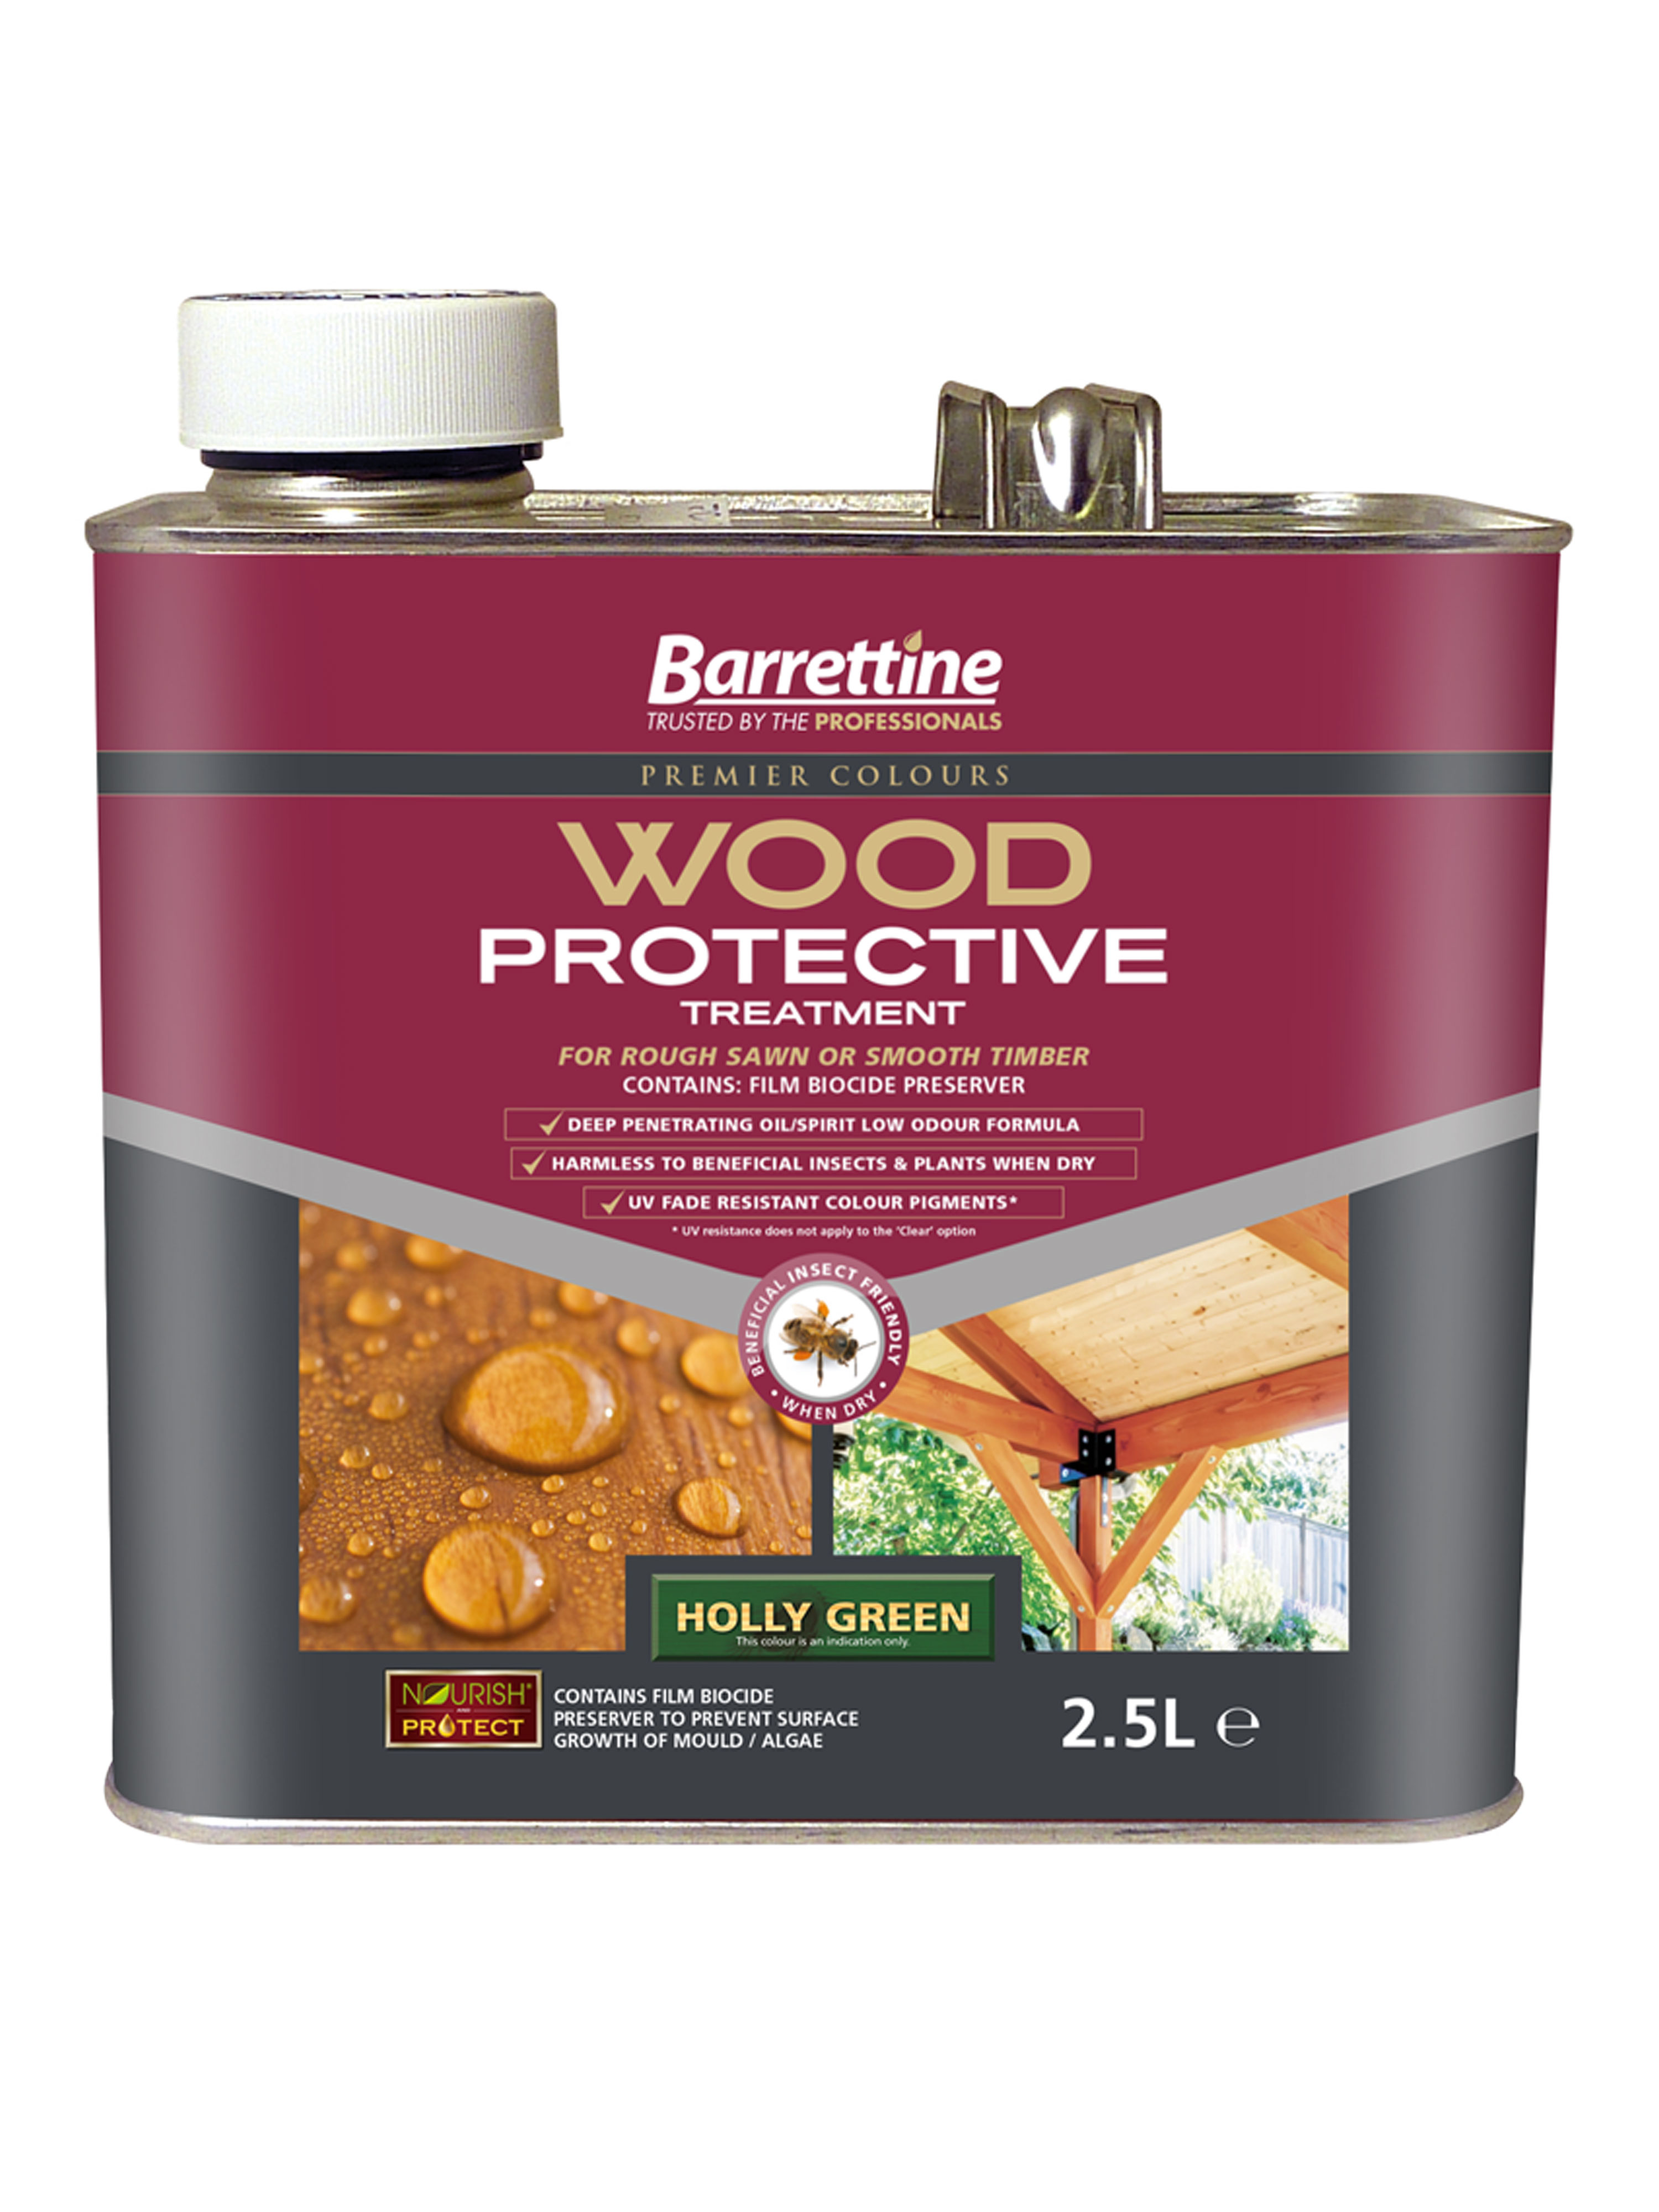 Wood Protective Treatment: Holly Green 2.5L